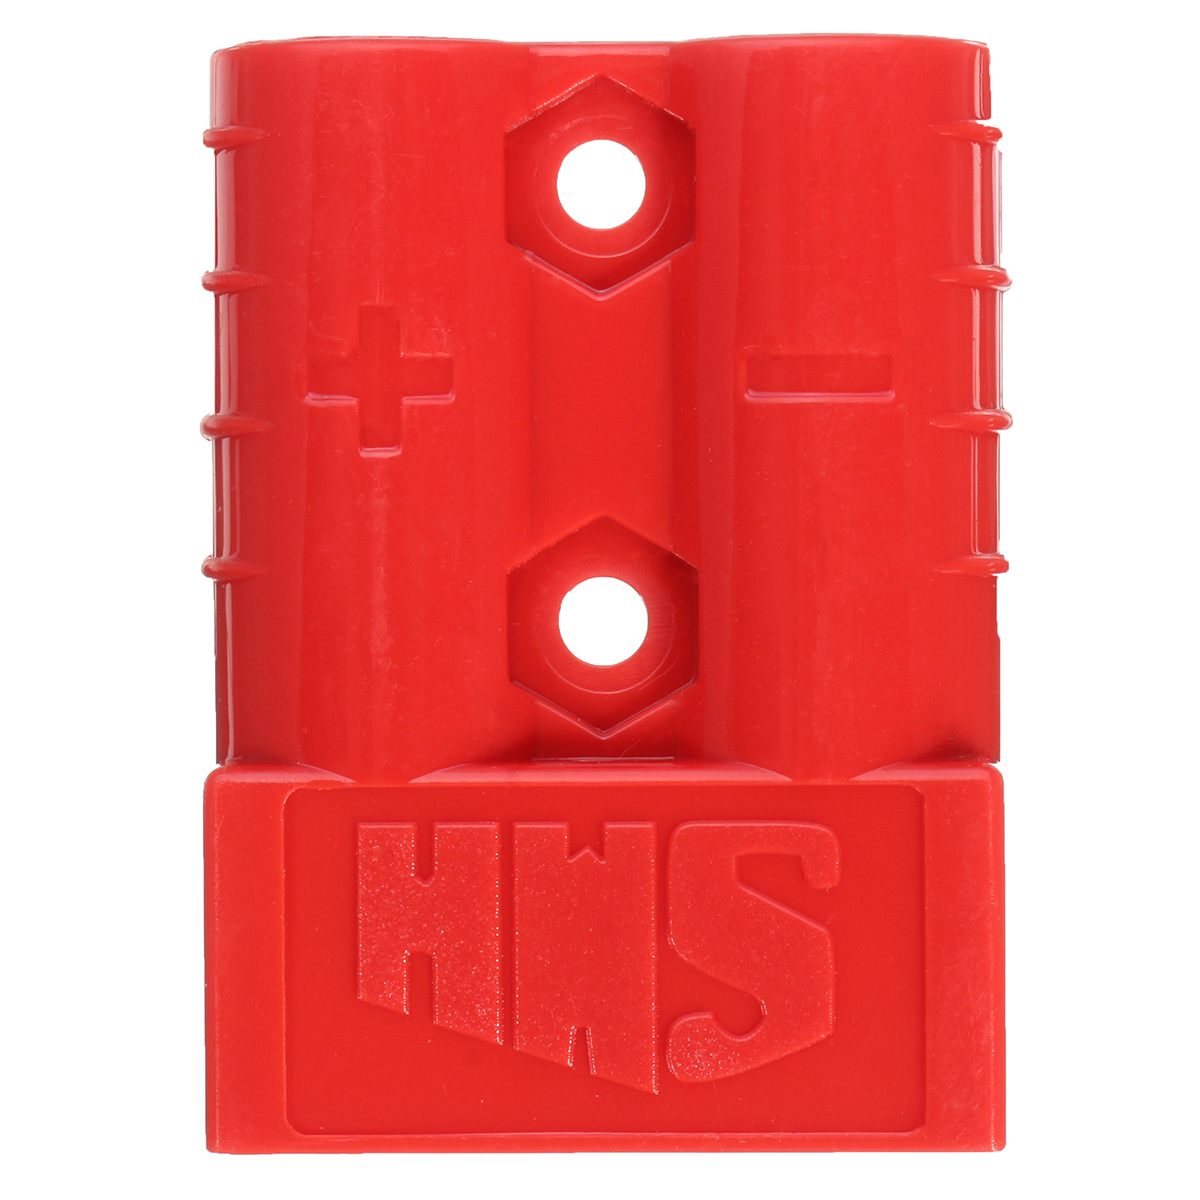 Excellway-50A-8AWG-Battery-Quick-Connector-Plug-Connect-Terminal-Disconnect-Winch-Trailer-Red-1170740-10